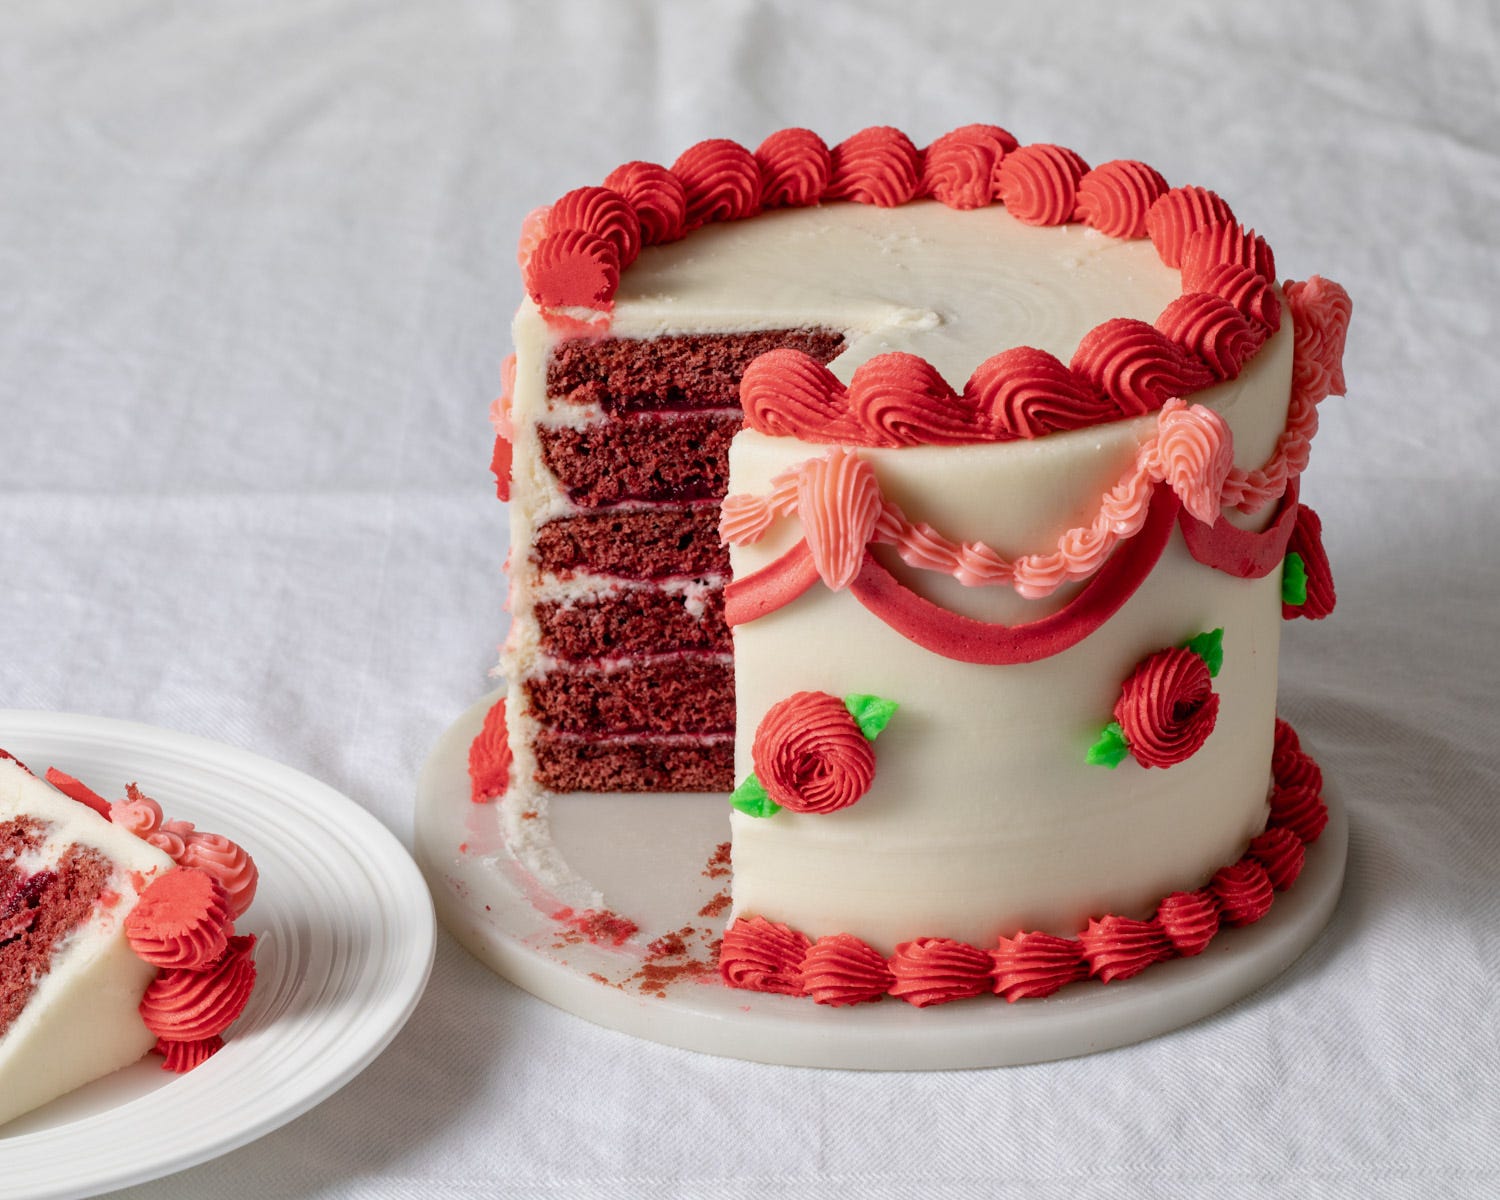 Red Velvet Cake With Cream Strawberries And Blueberry Stock Photo -  Download Image Now - iStock